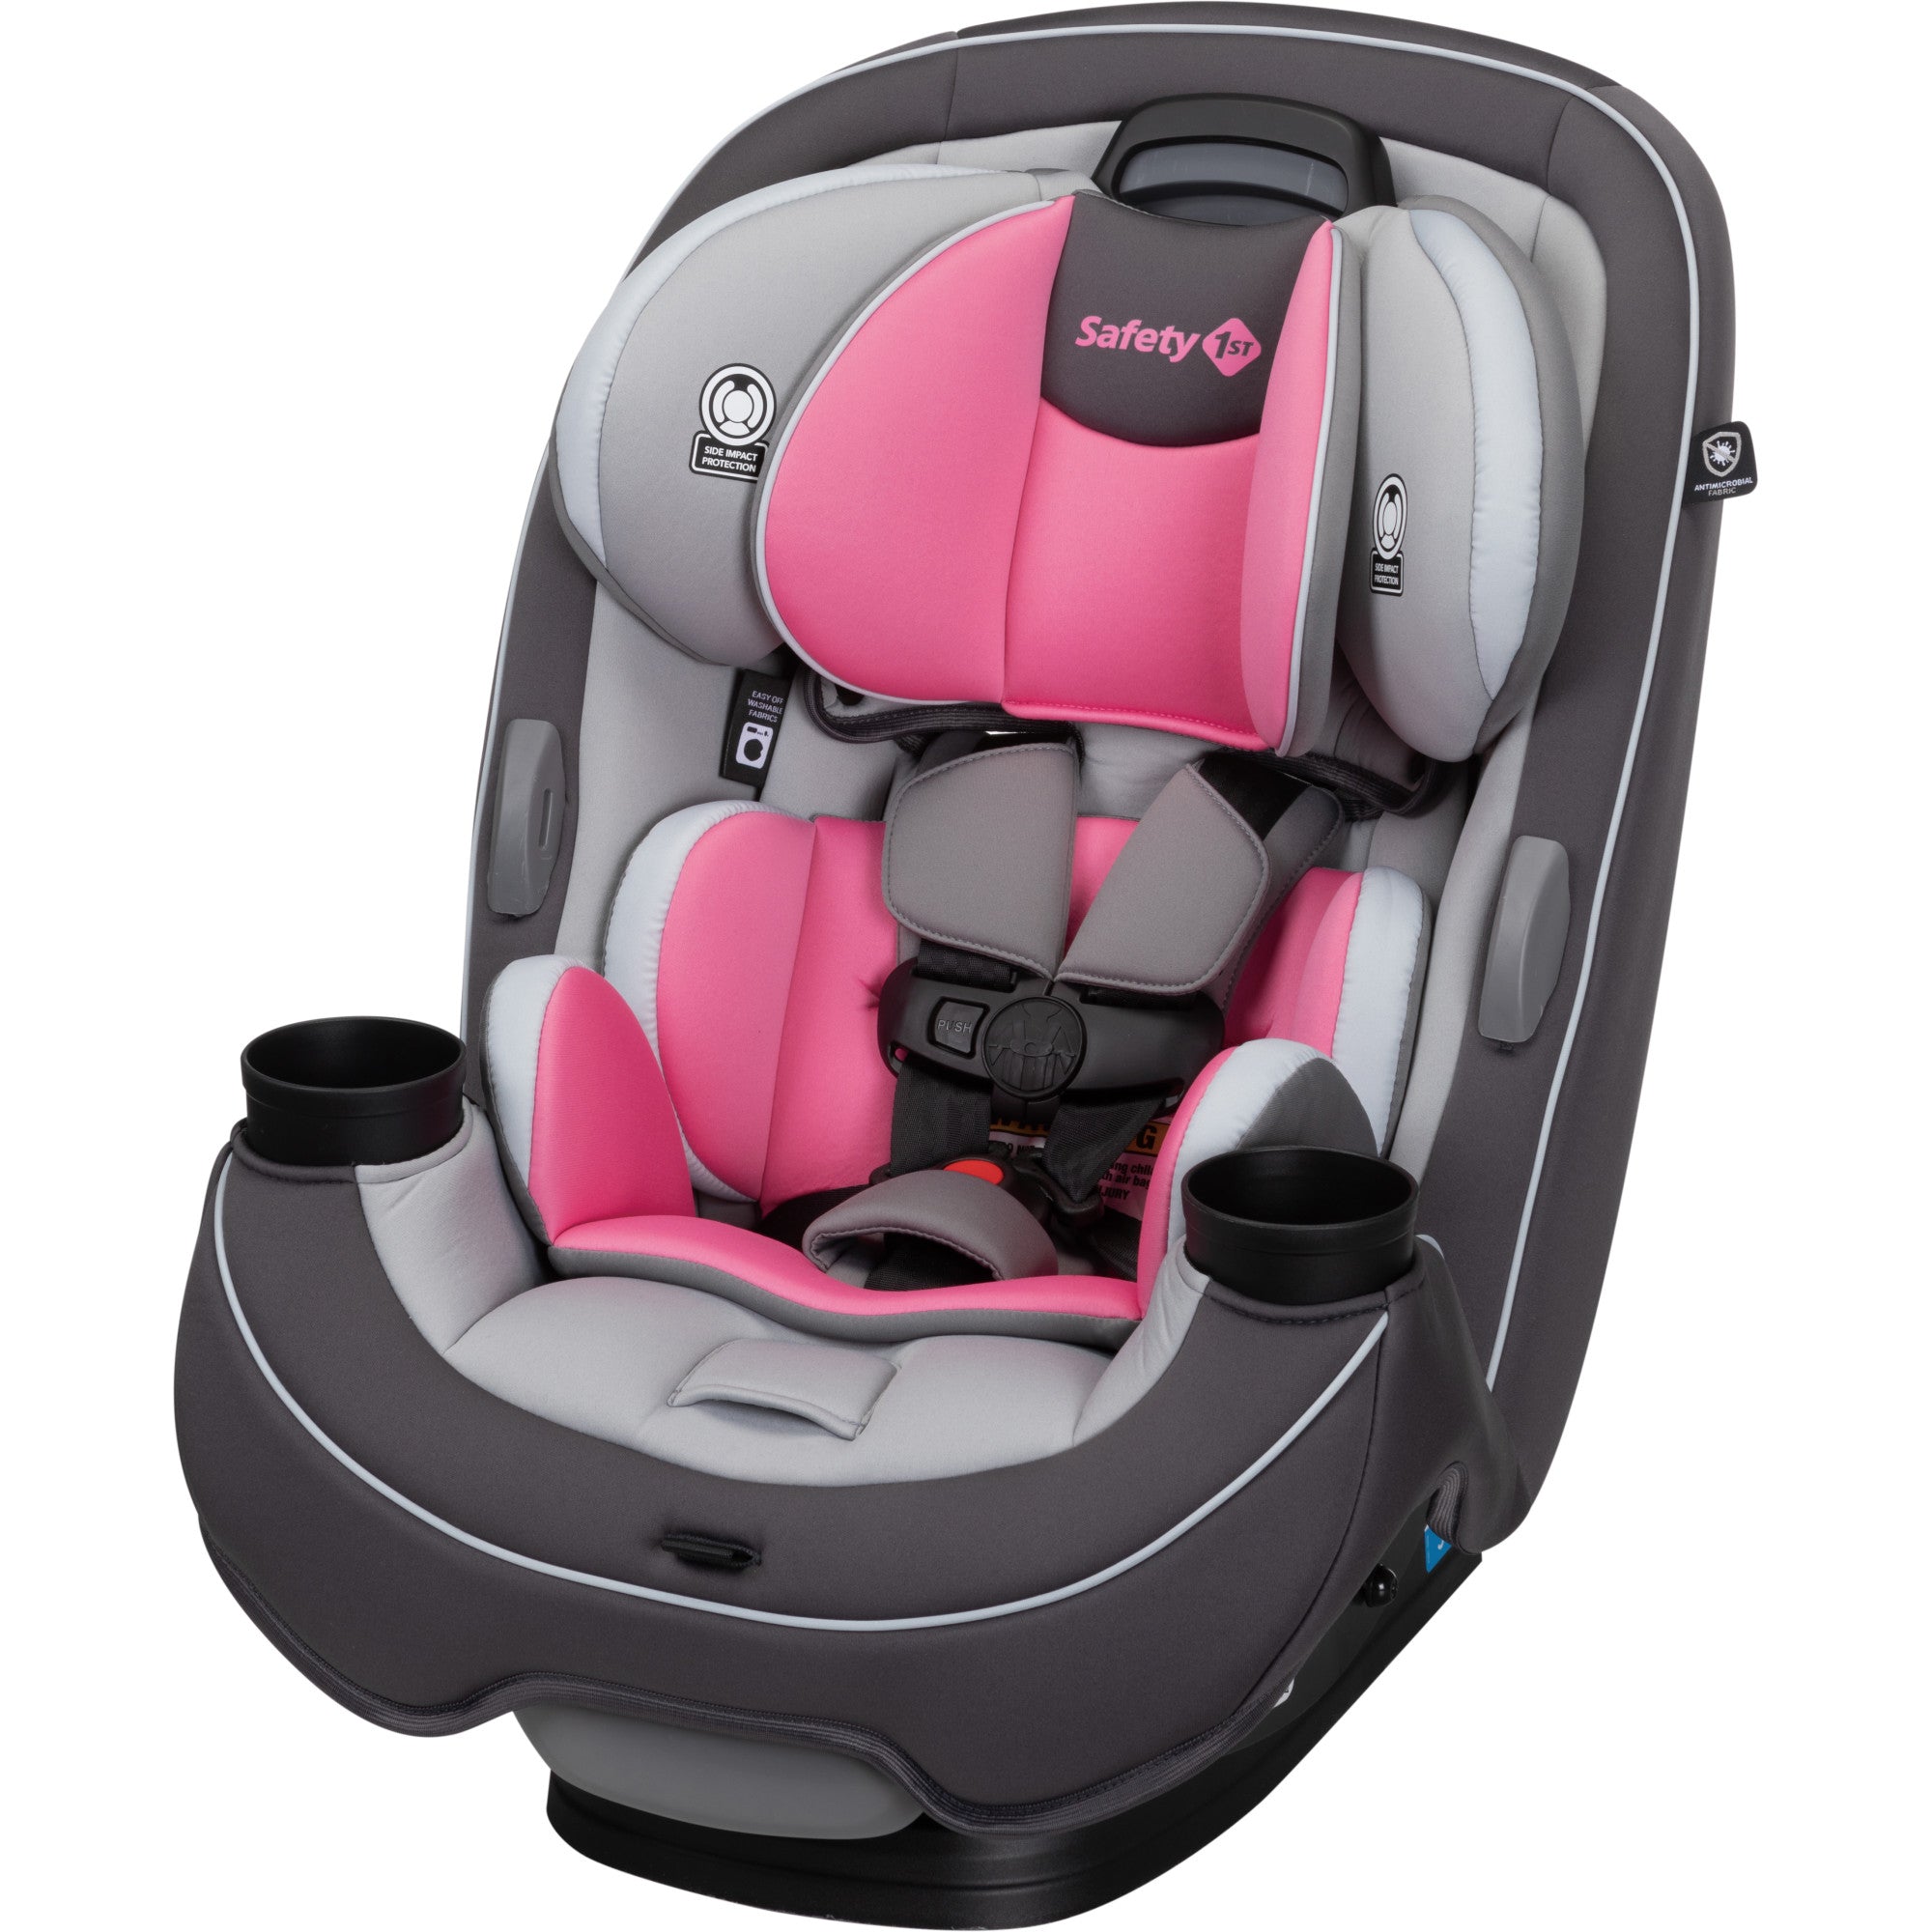 Safety 1st car seat in pink and grey